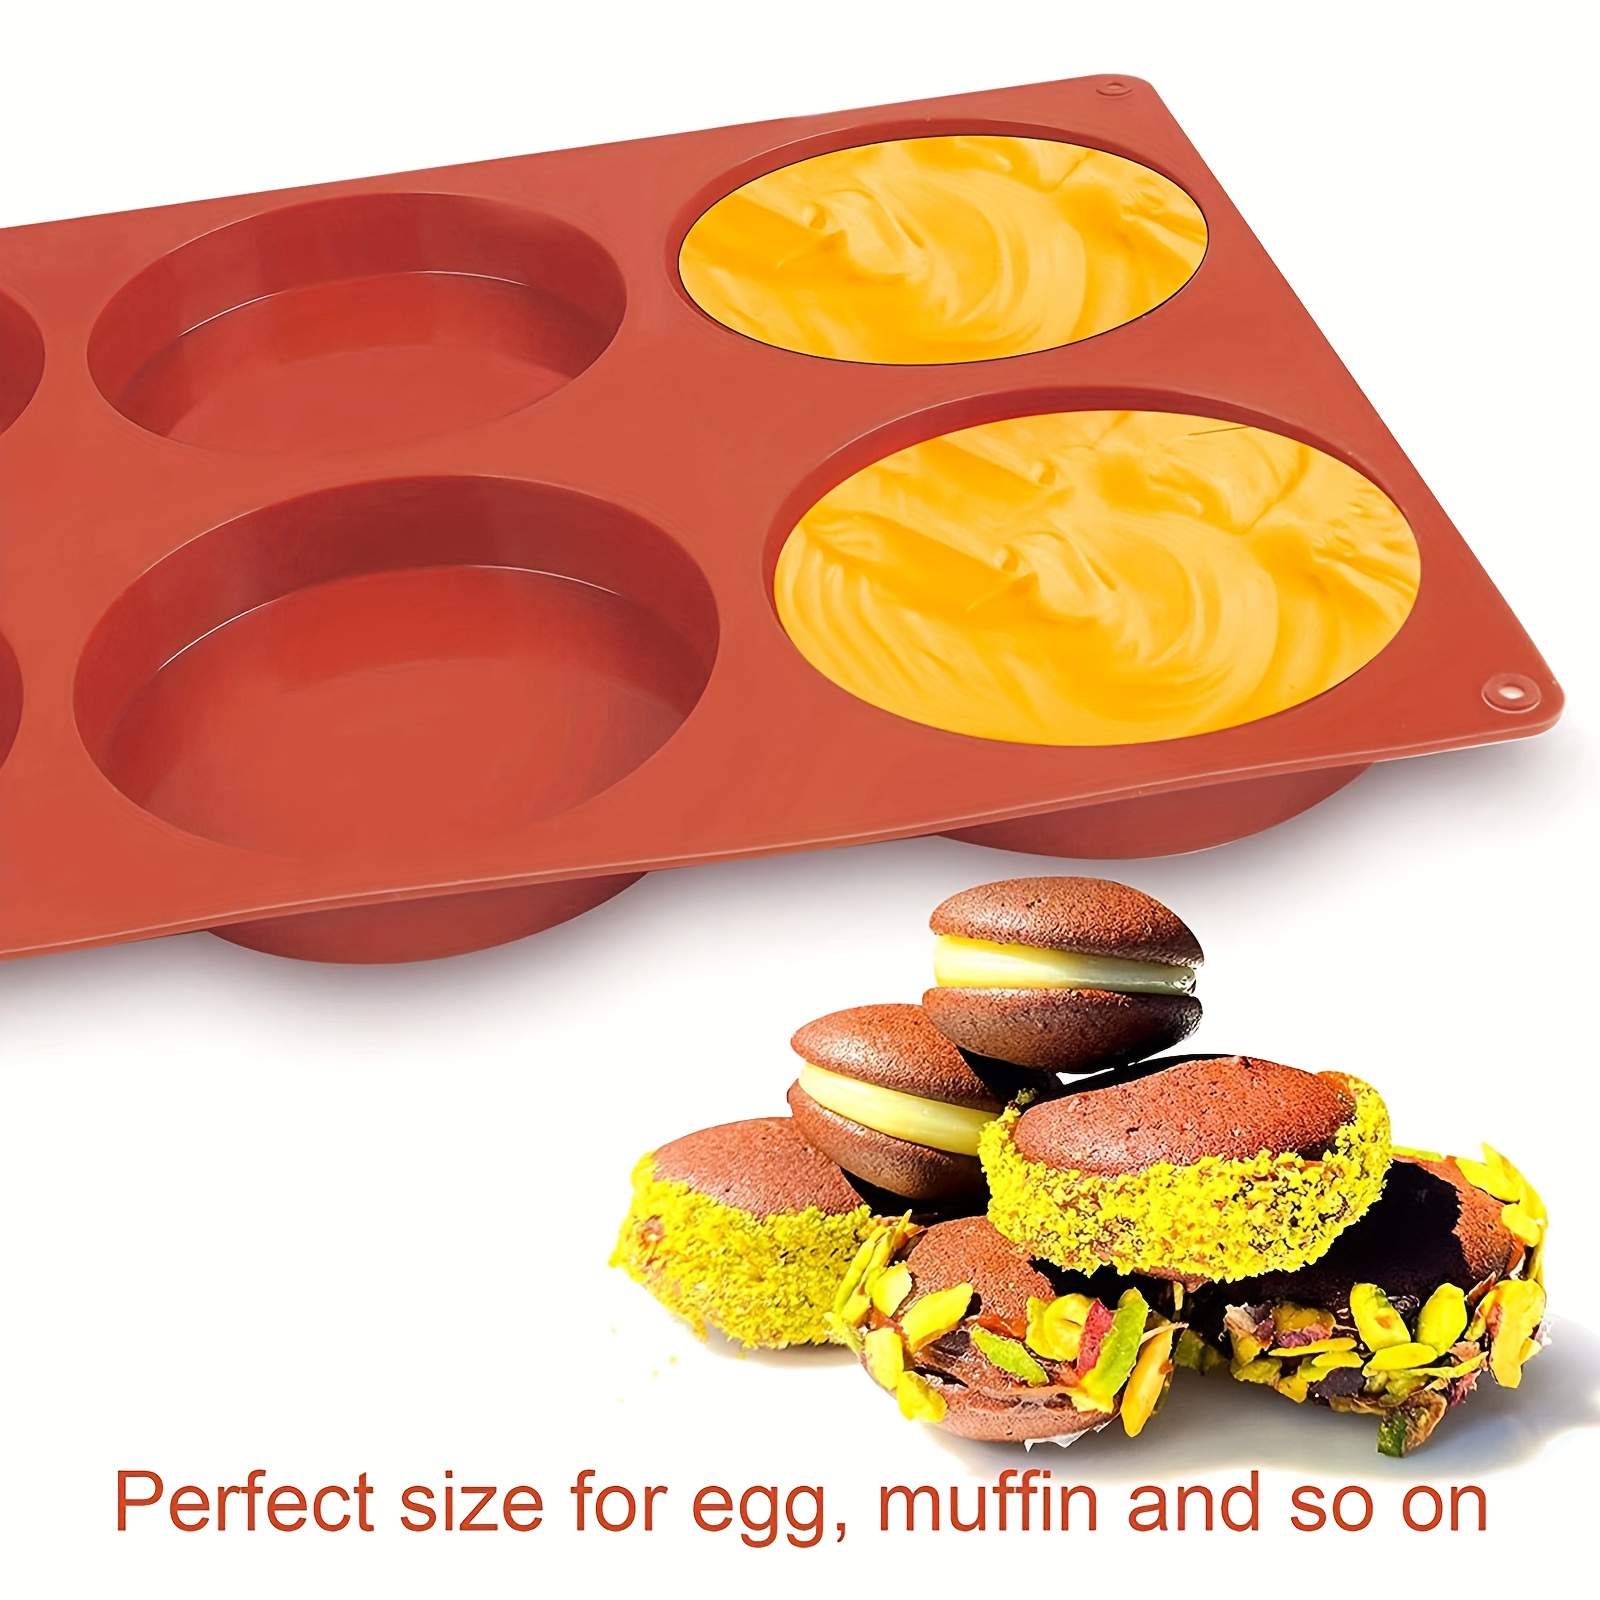 Product: Silicone Muffin Molds